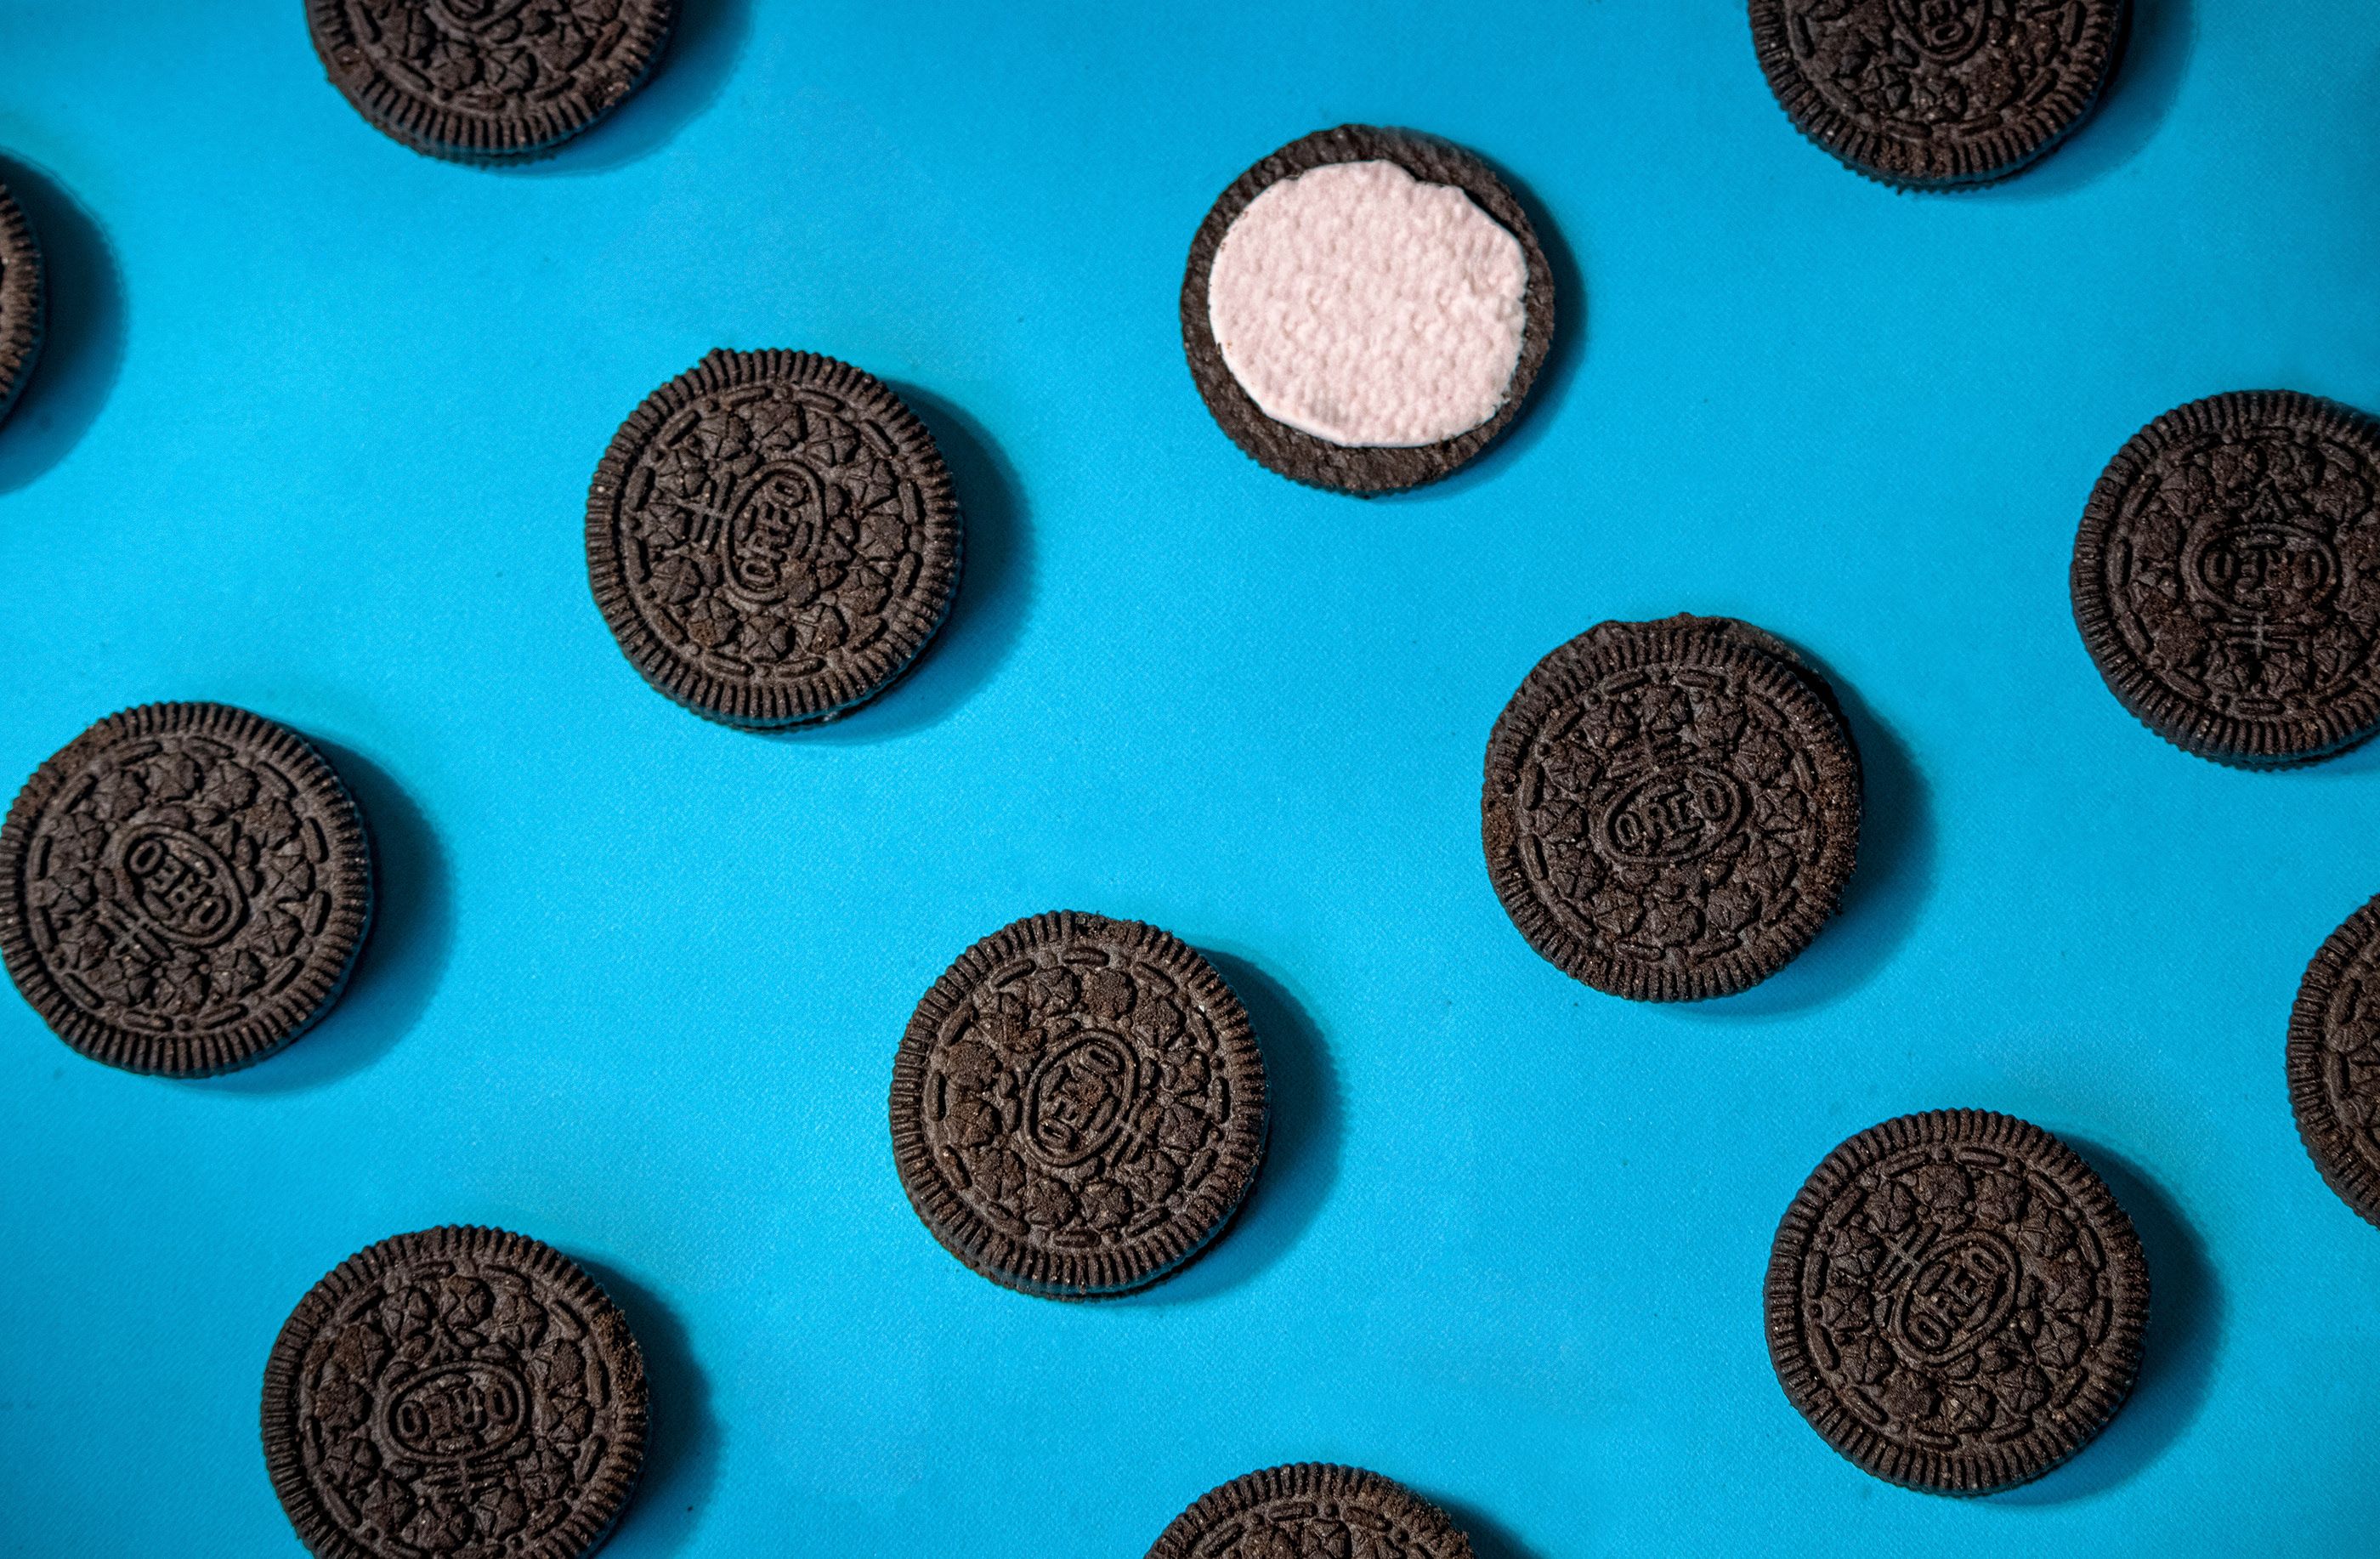 A pattern of chocolate sandwich cookies on a blue background, with one cookie missing the filling. - Oreo